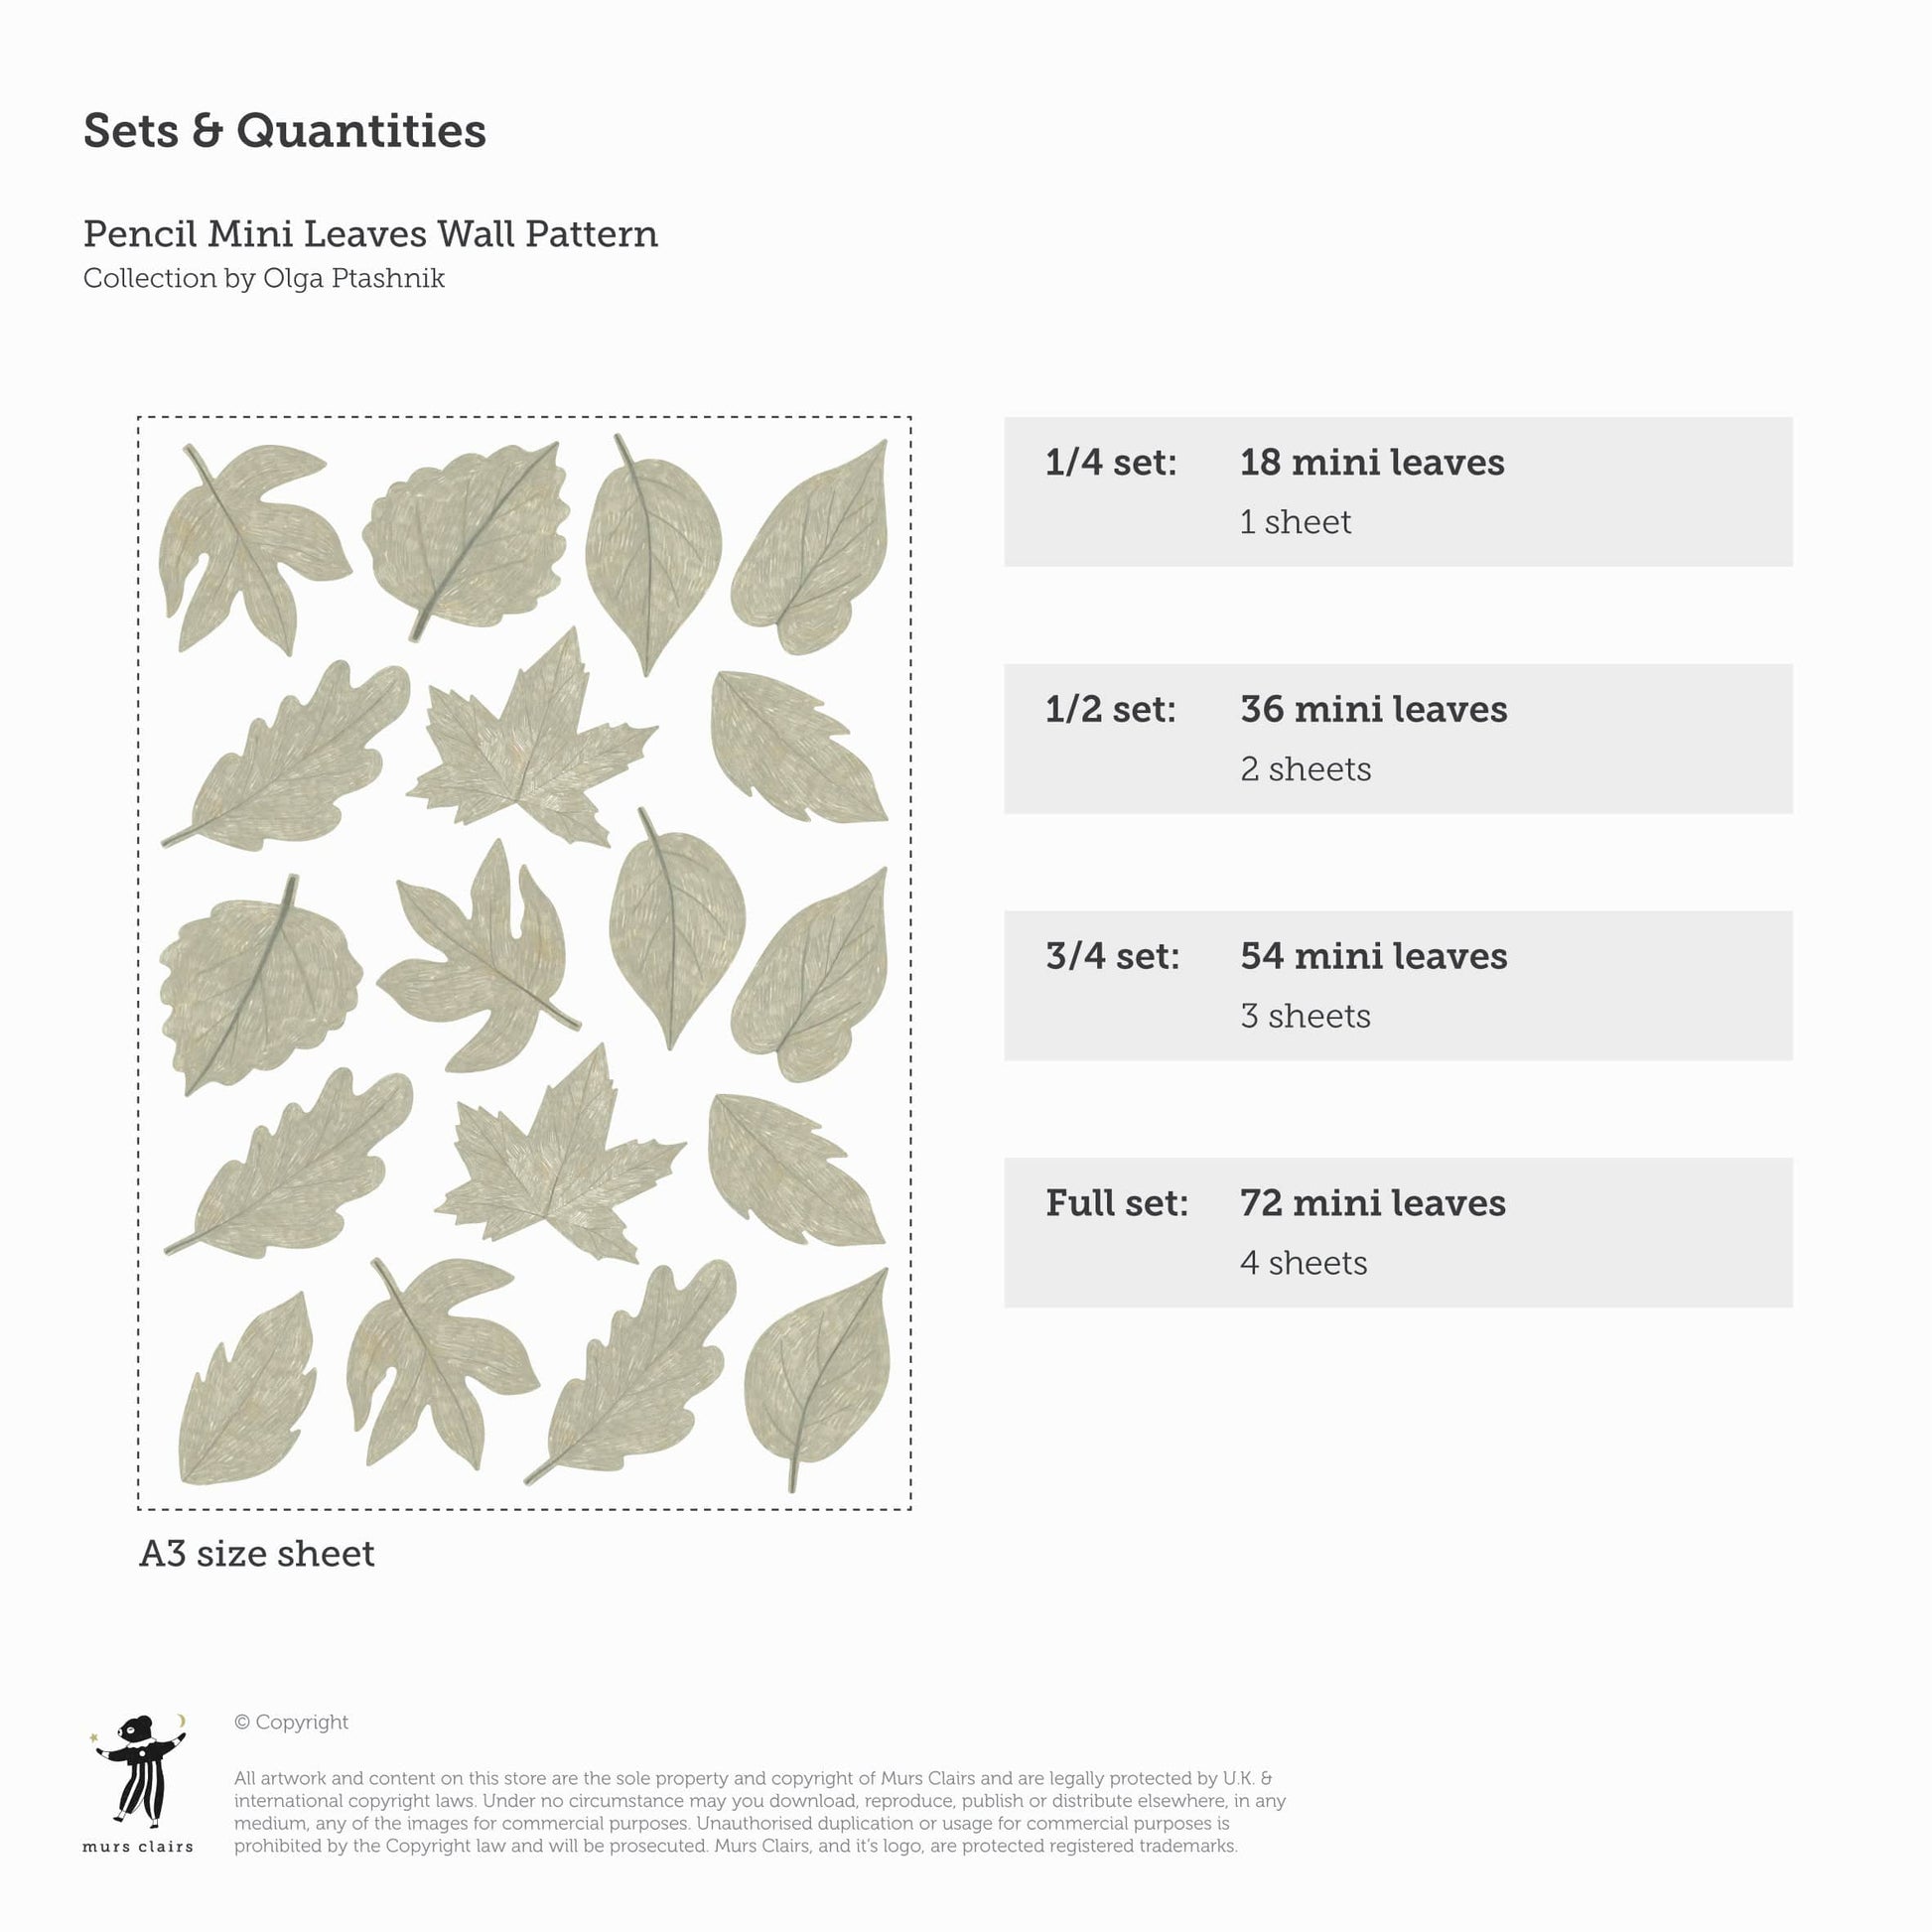 Image showing the A3 sheet of wall stickers. Each sheet has 18 mini leaf stickers